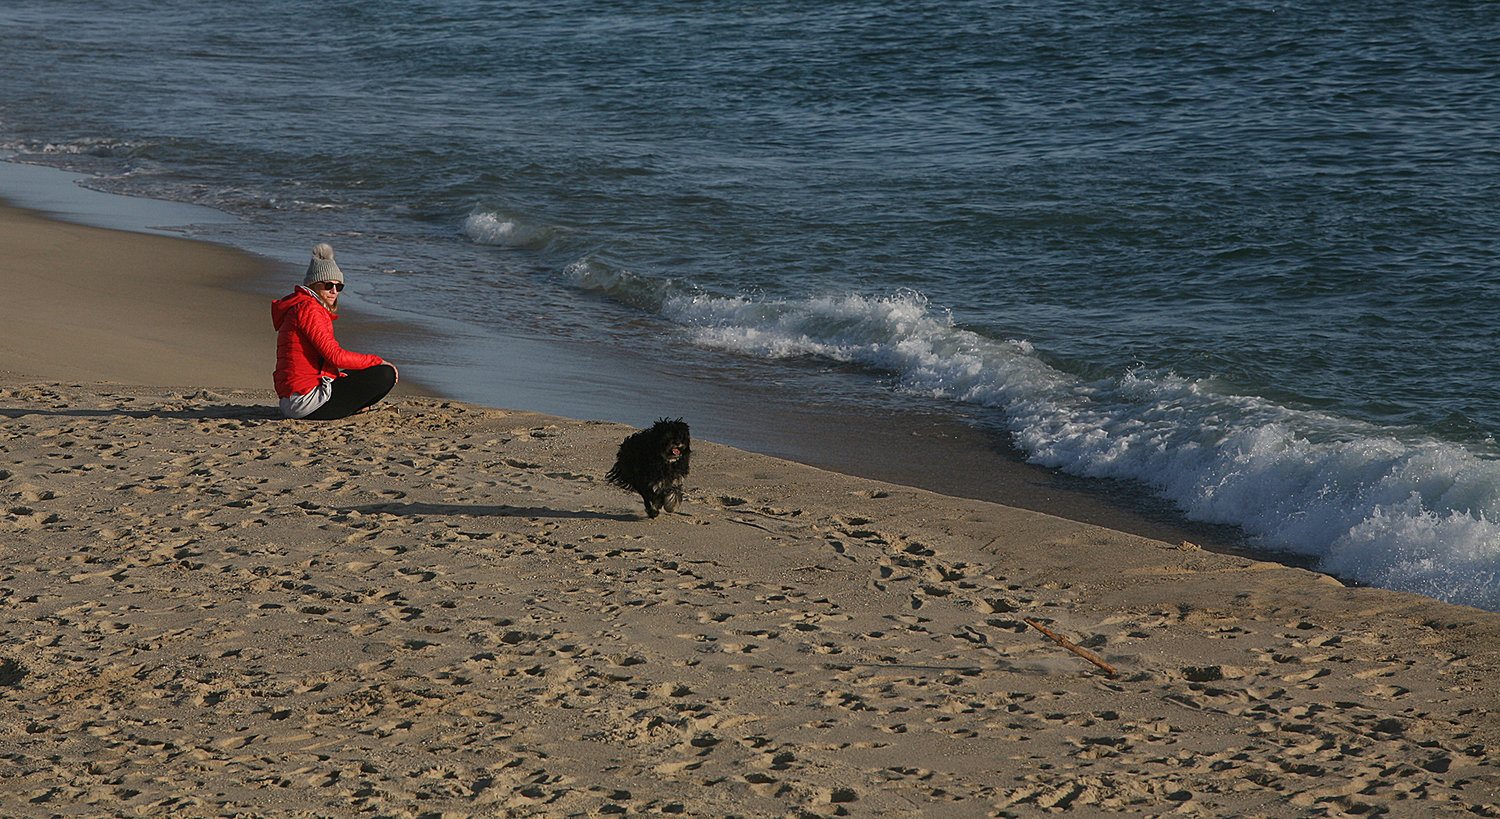 Mairi Lindsay, of Nantucket, plays fetch with her dog at Cisco Beach on Monday.